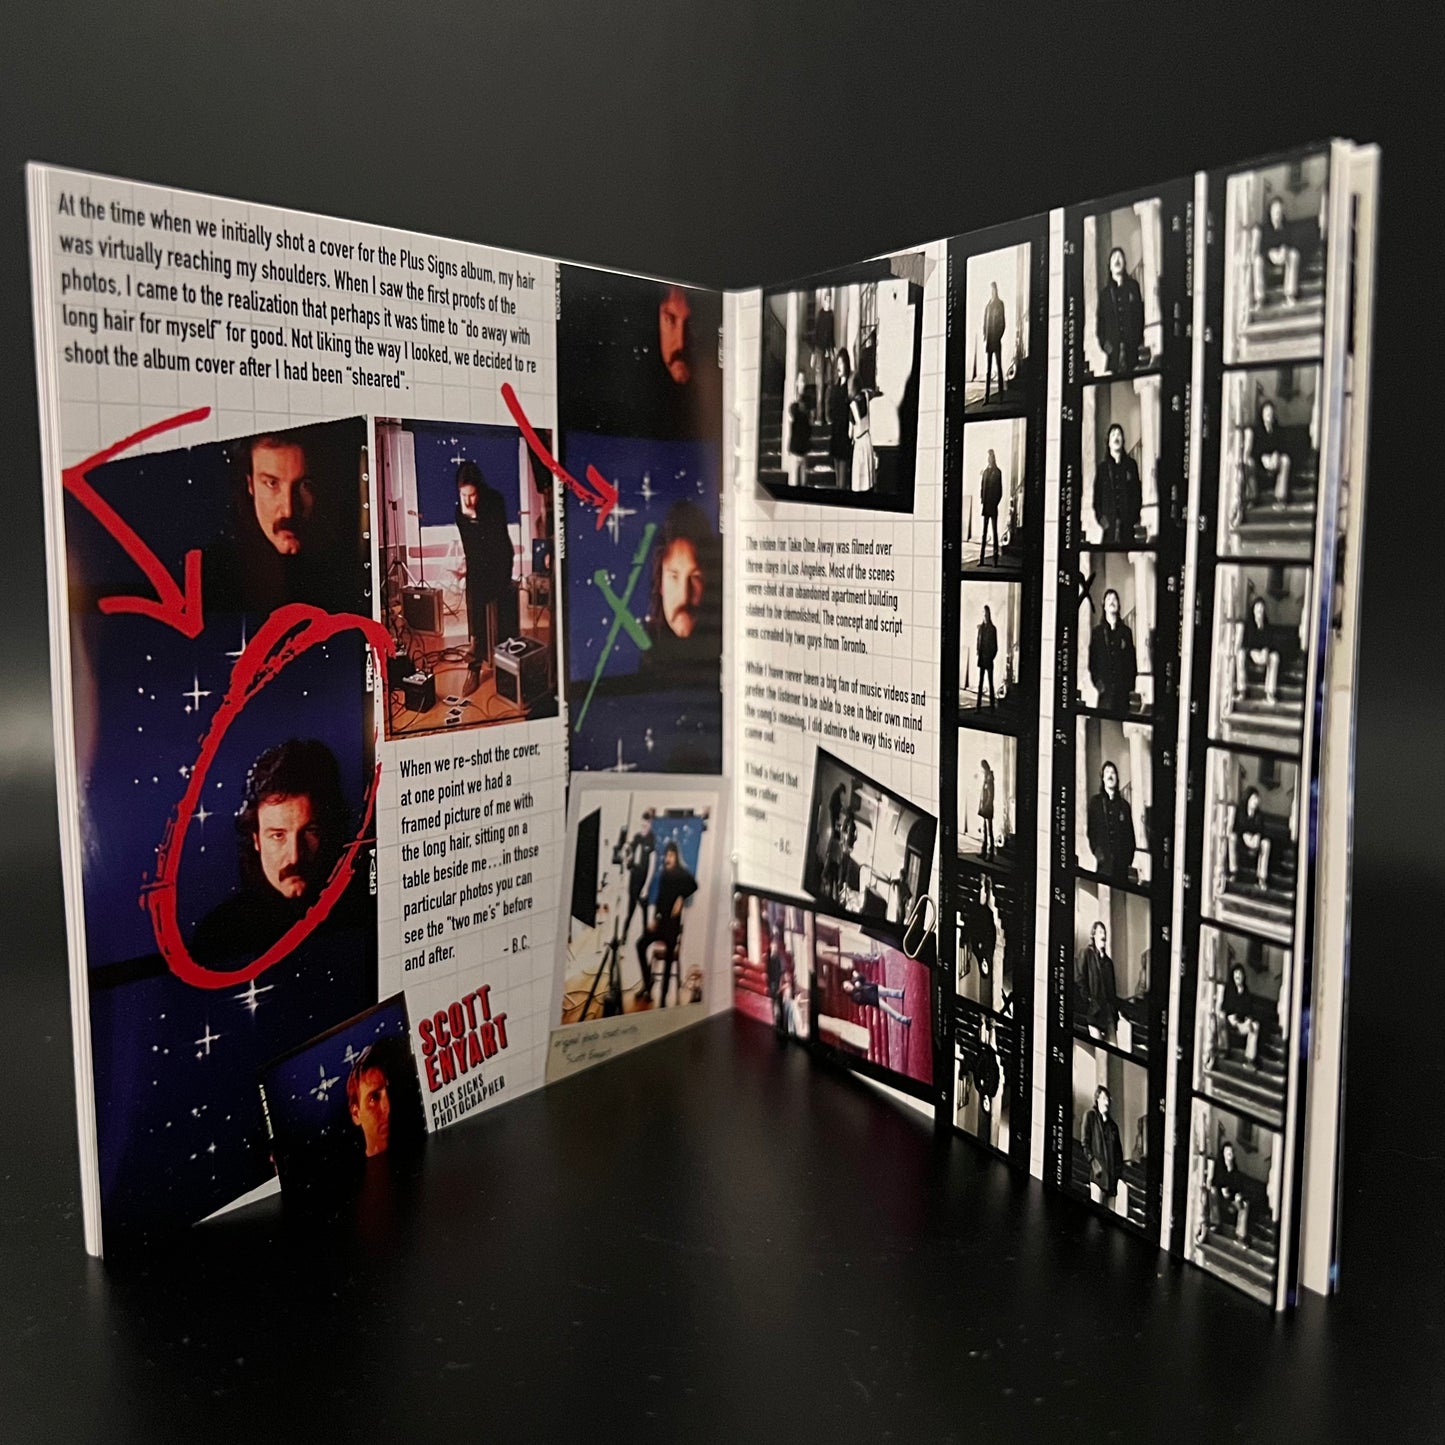 Sample of the liner notes in the 28 page booklet included with the CD